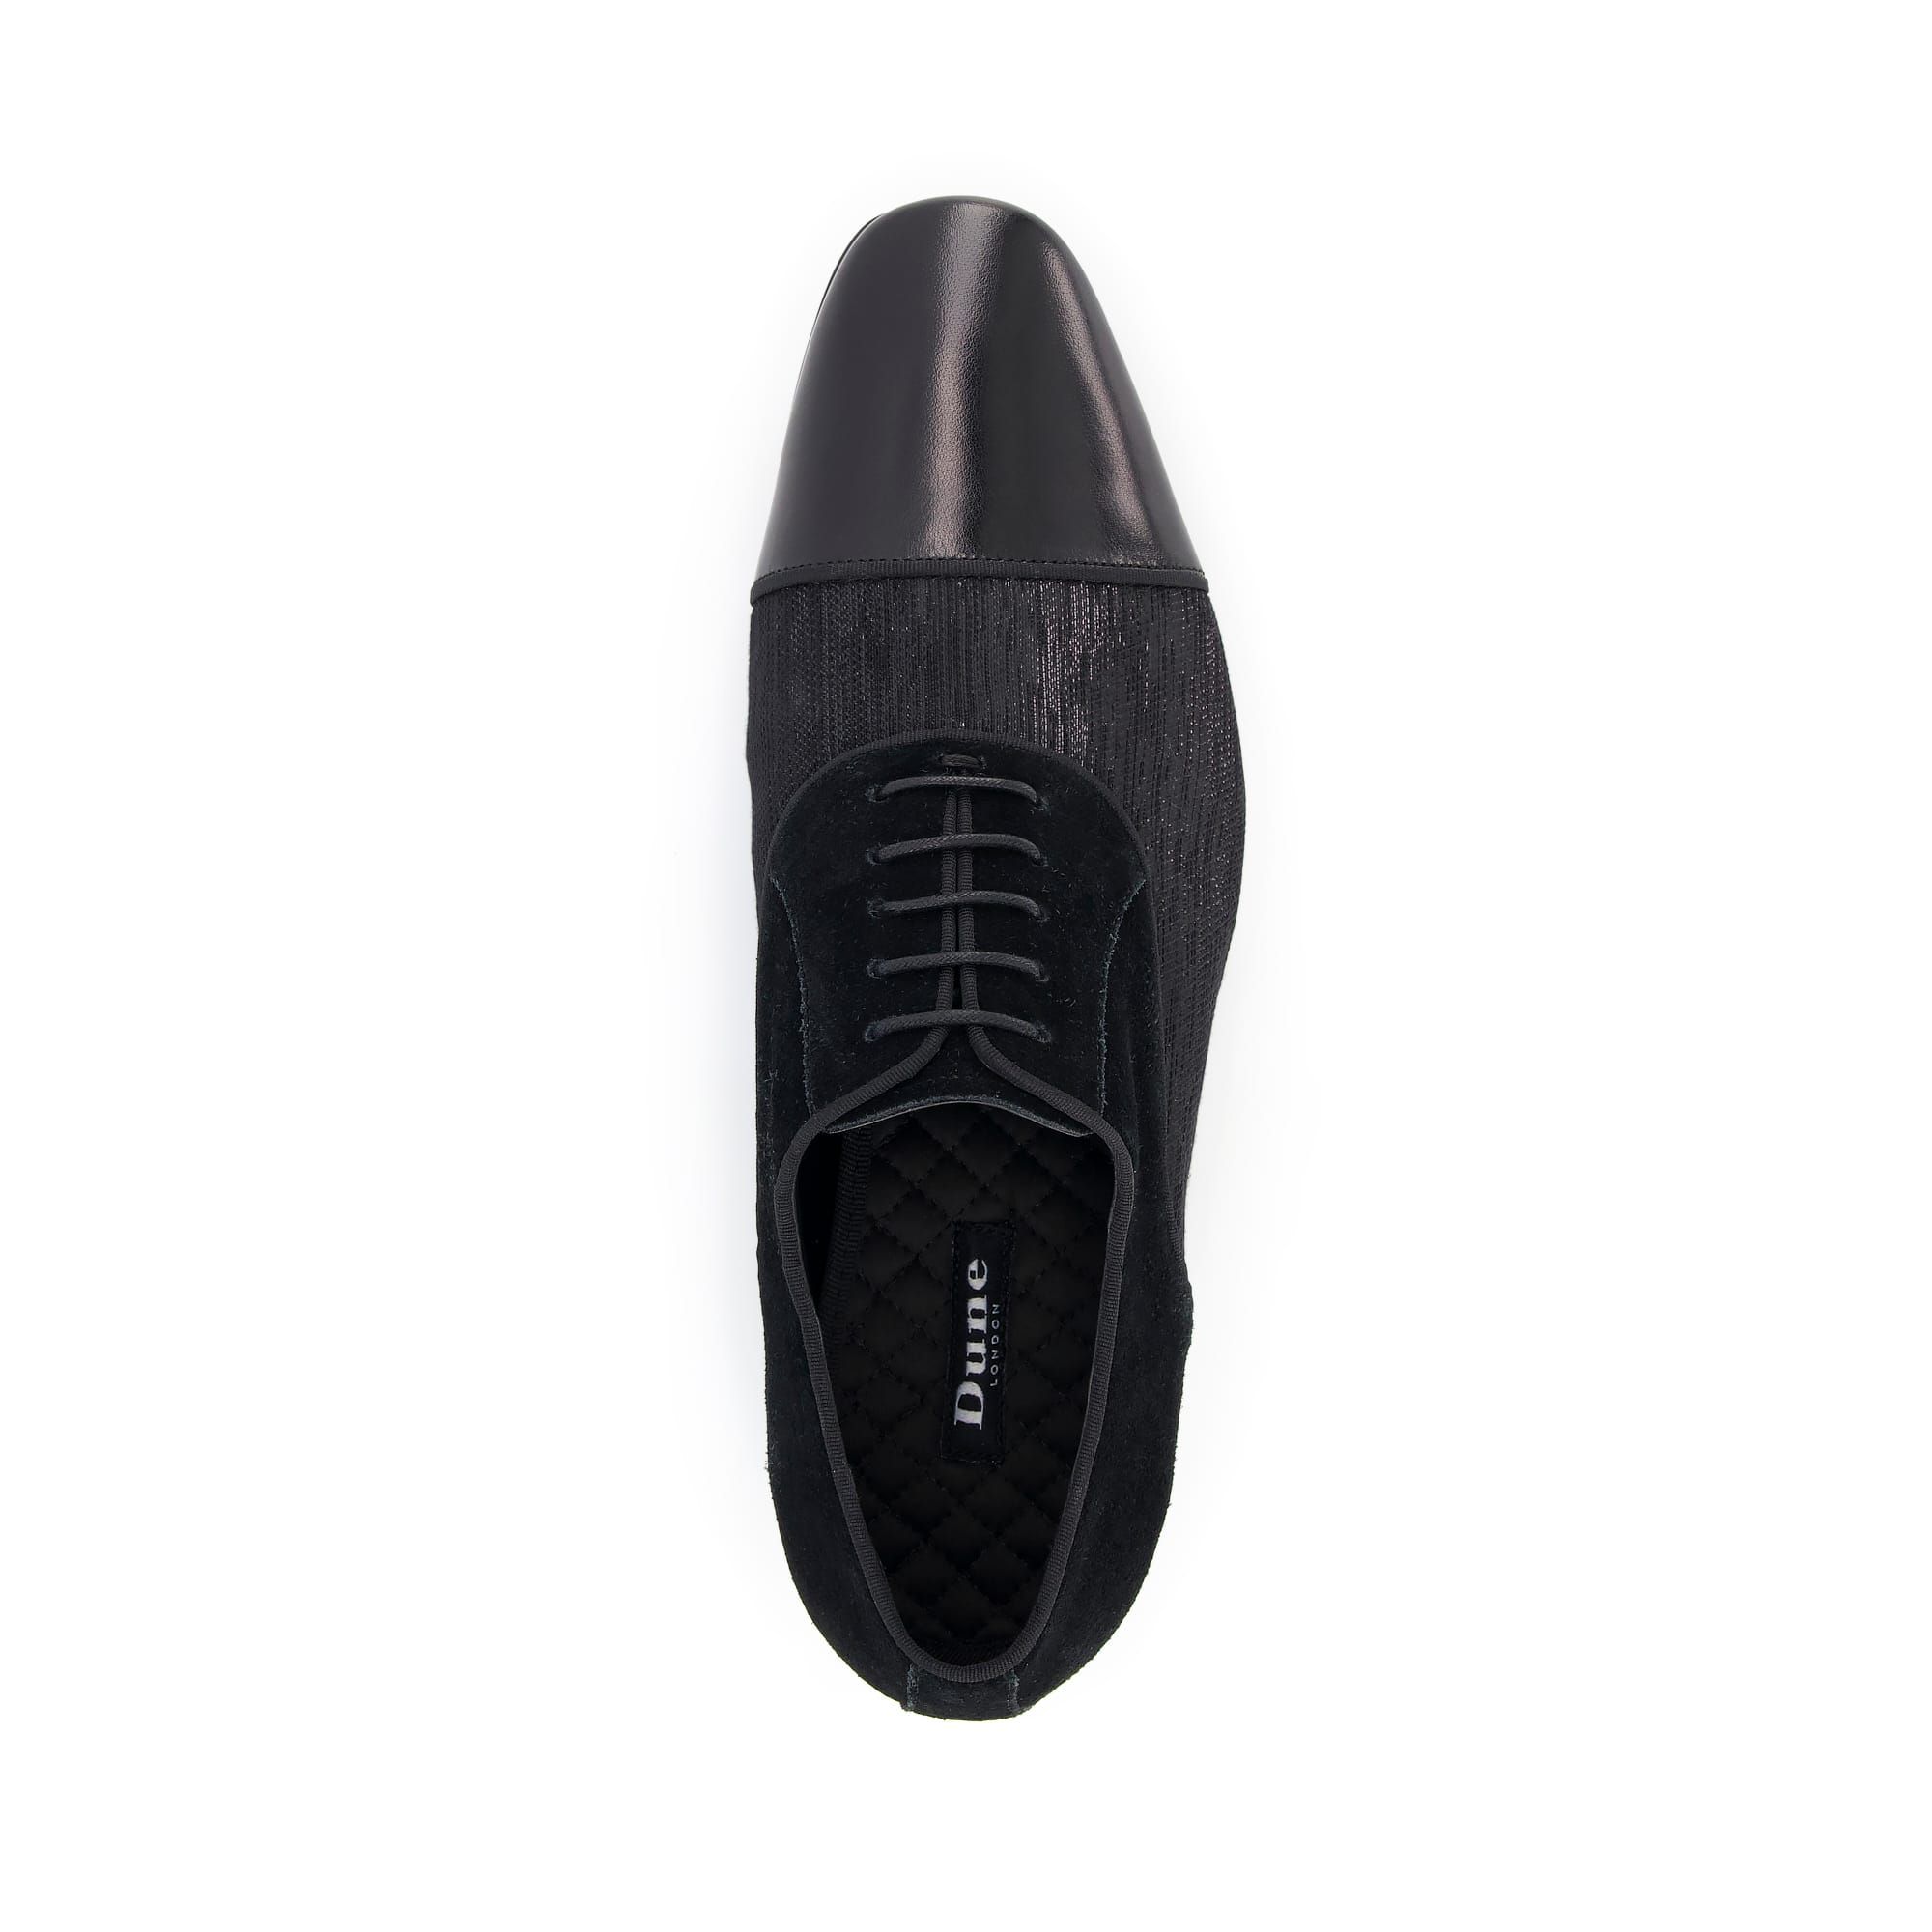 With a welcome return to formal dressing this dapper style with a streamlined silhouette will be your go-to shoes for occasion dressing. Comprised from three complementing textures the velvet sock, contrast fabric vamp and high shine leather toe cap